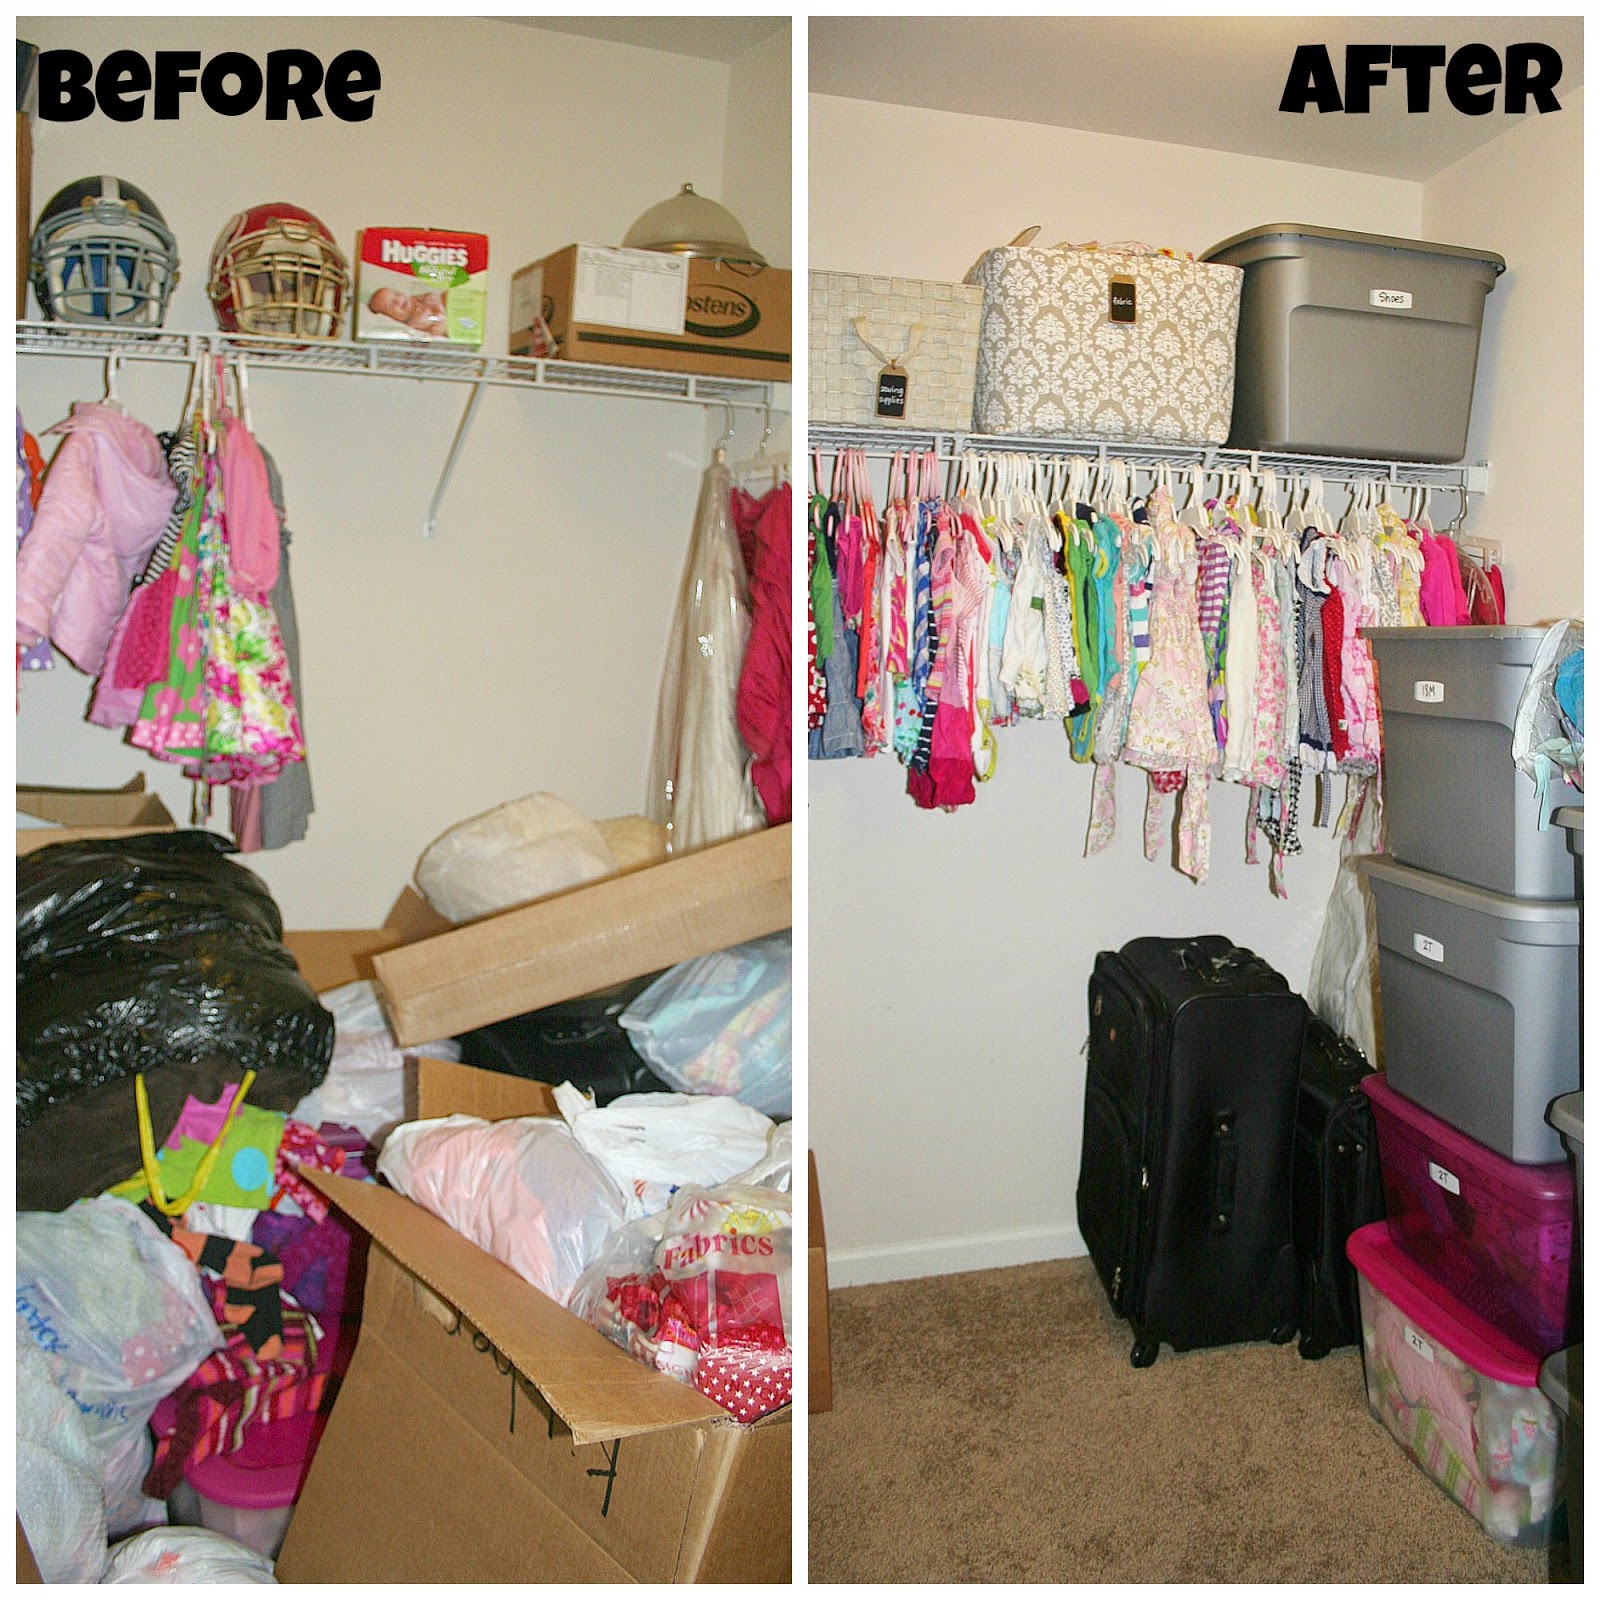 Organizing Plus 123: Guest Room Closet: Before & After Pictures!